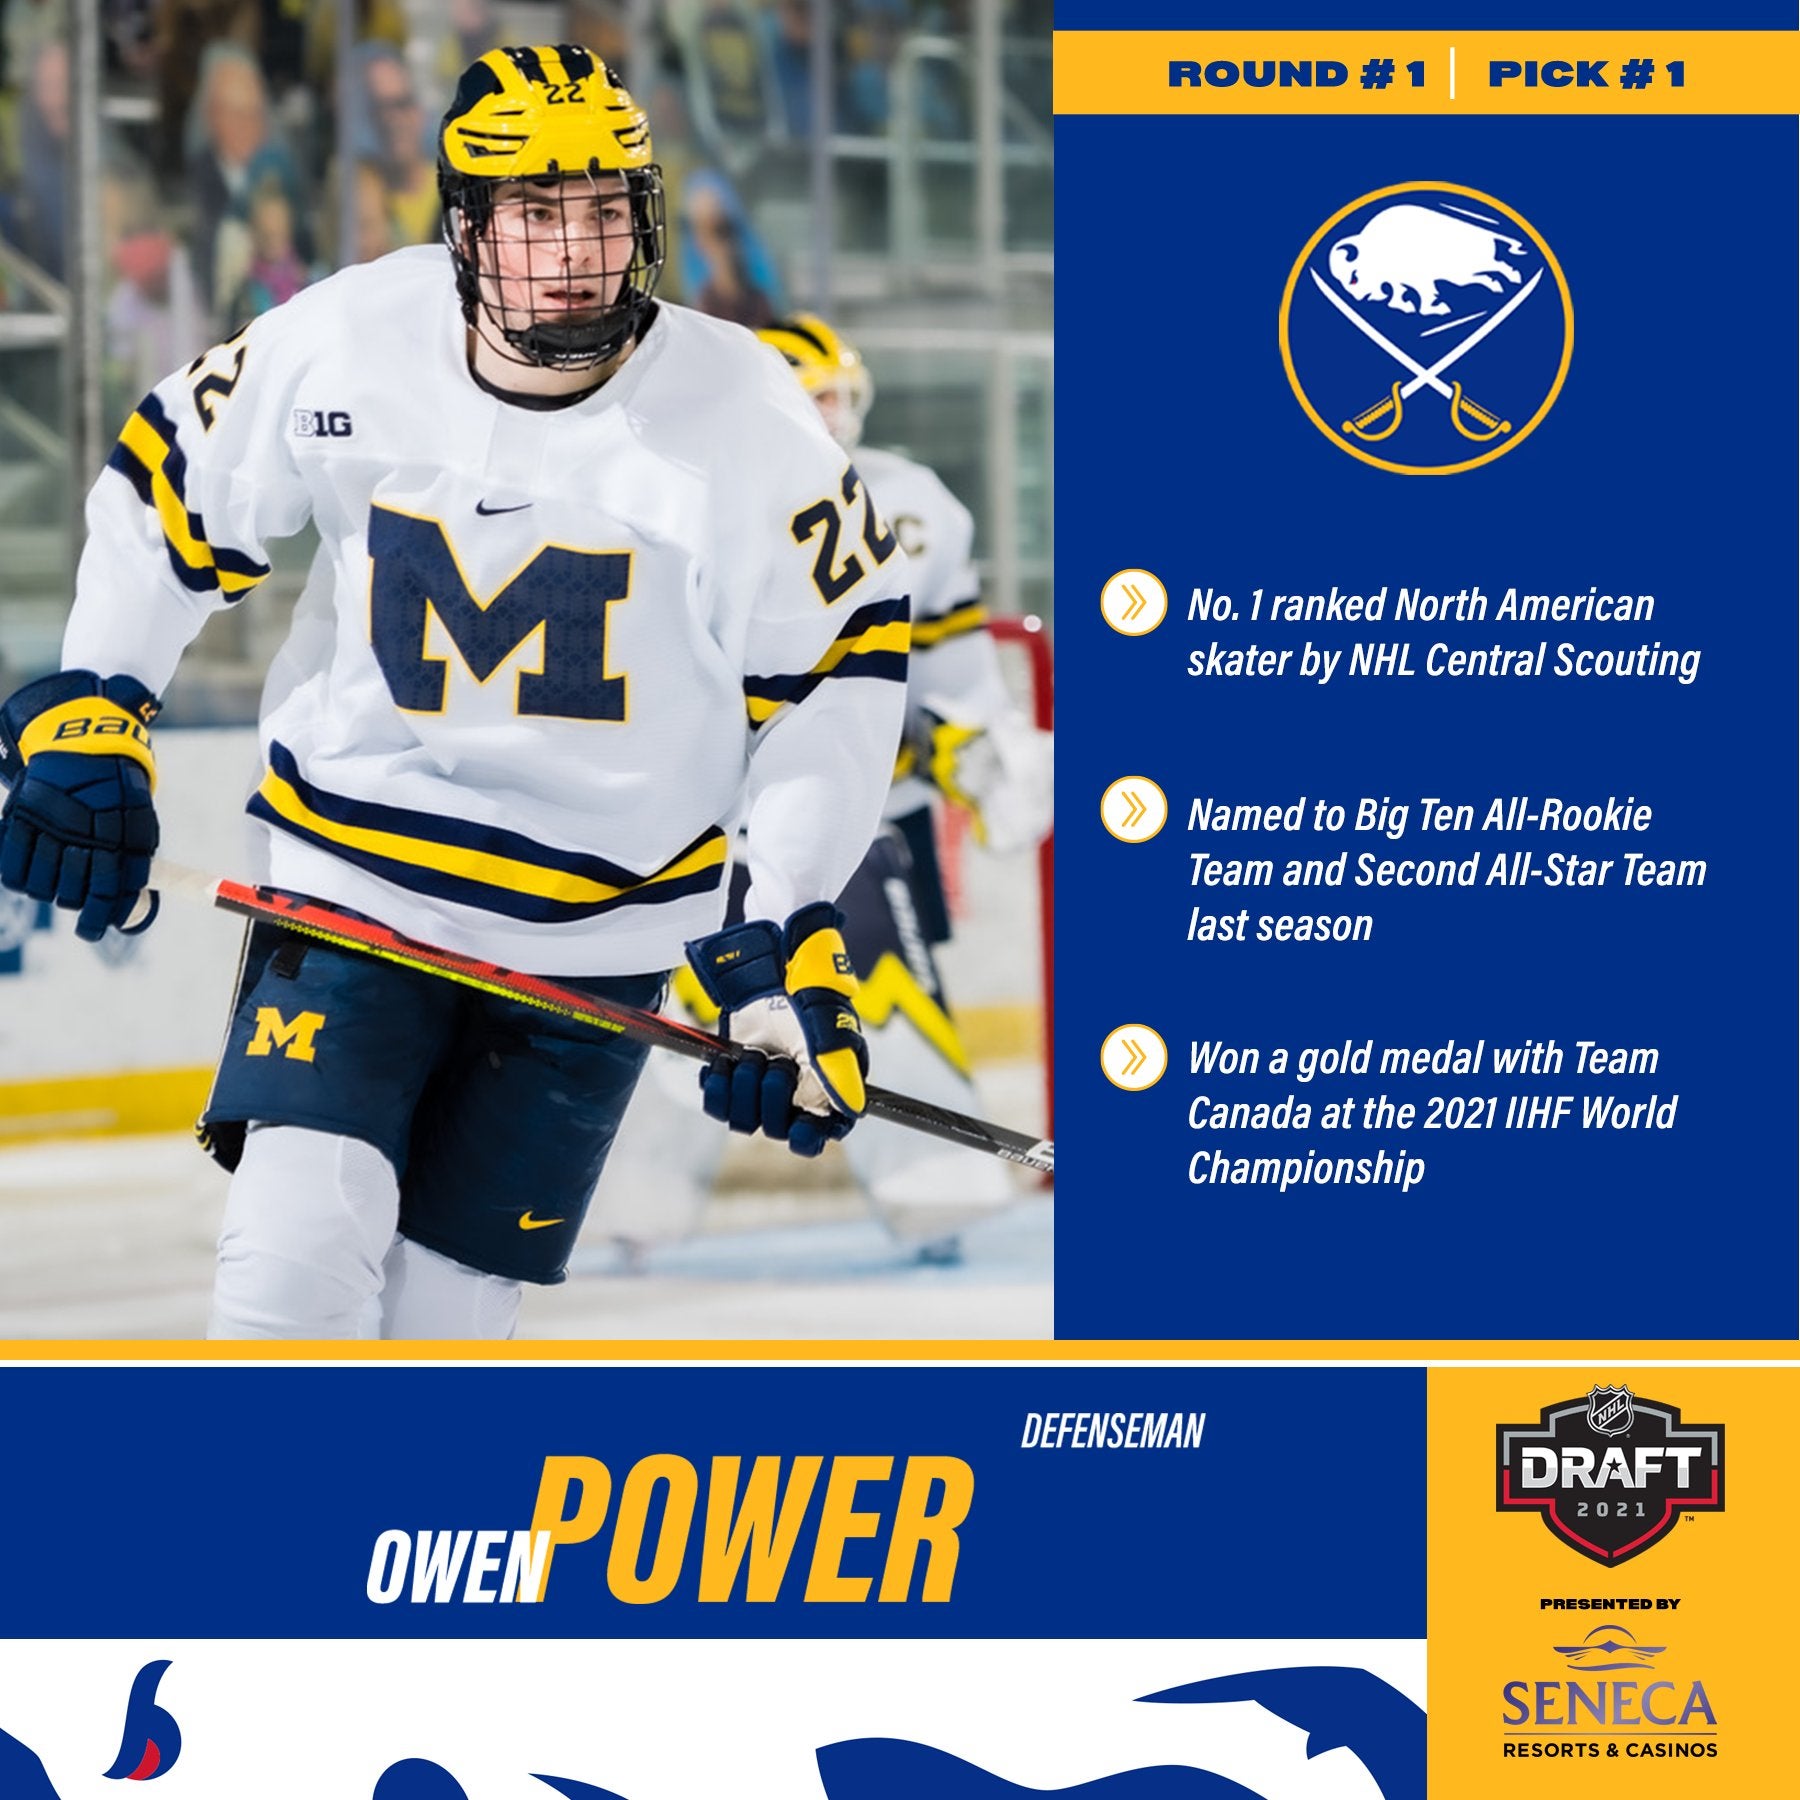 NHL Draft Recap: Owen Power's potential and future role on Sabres